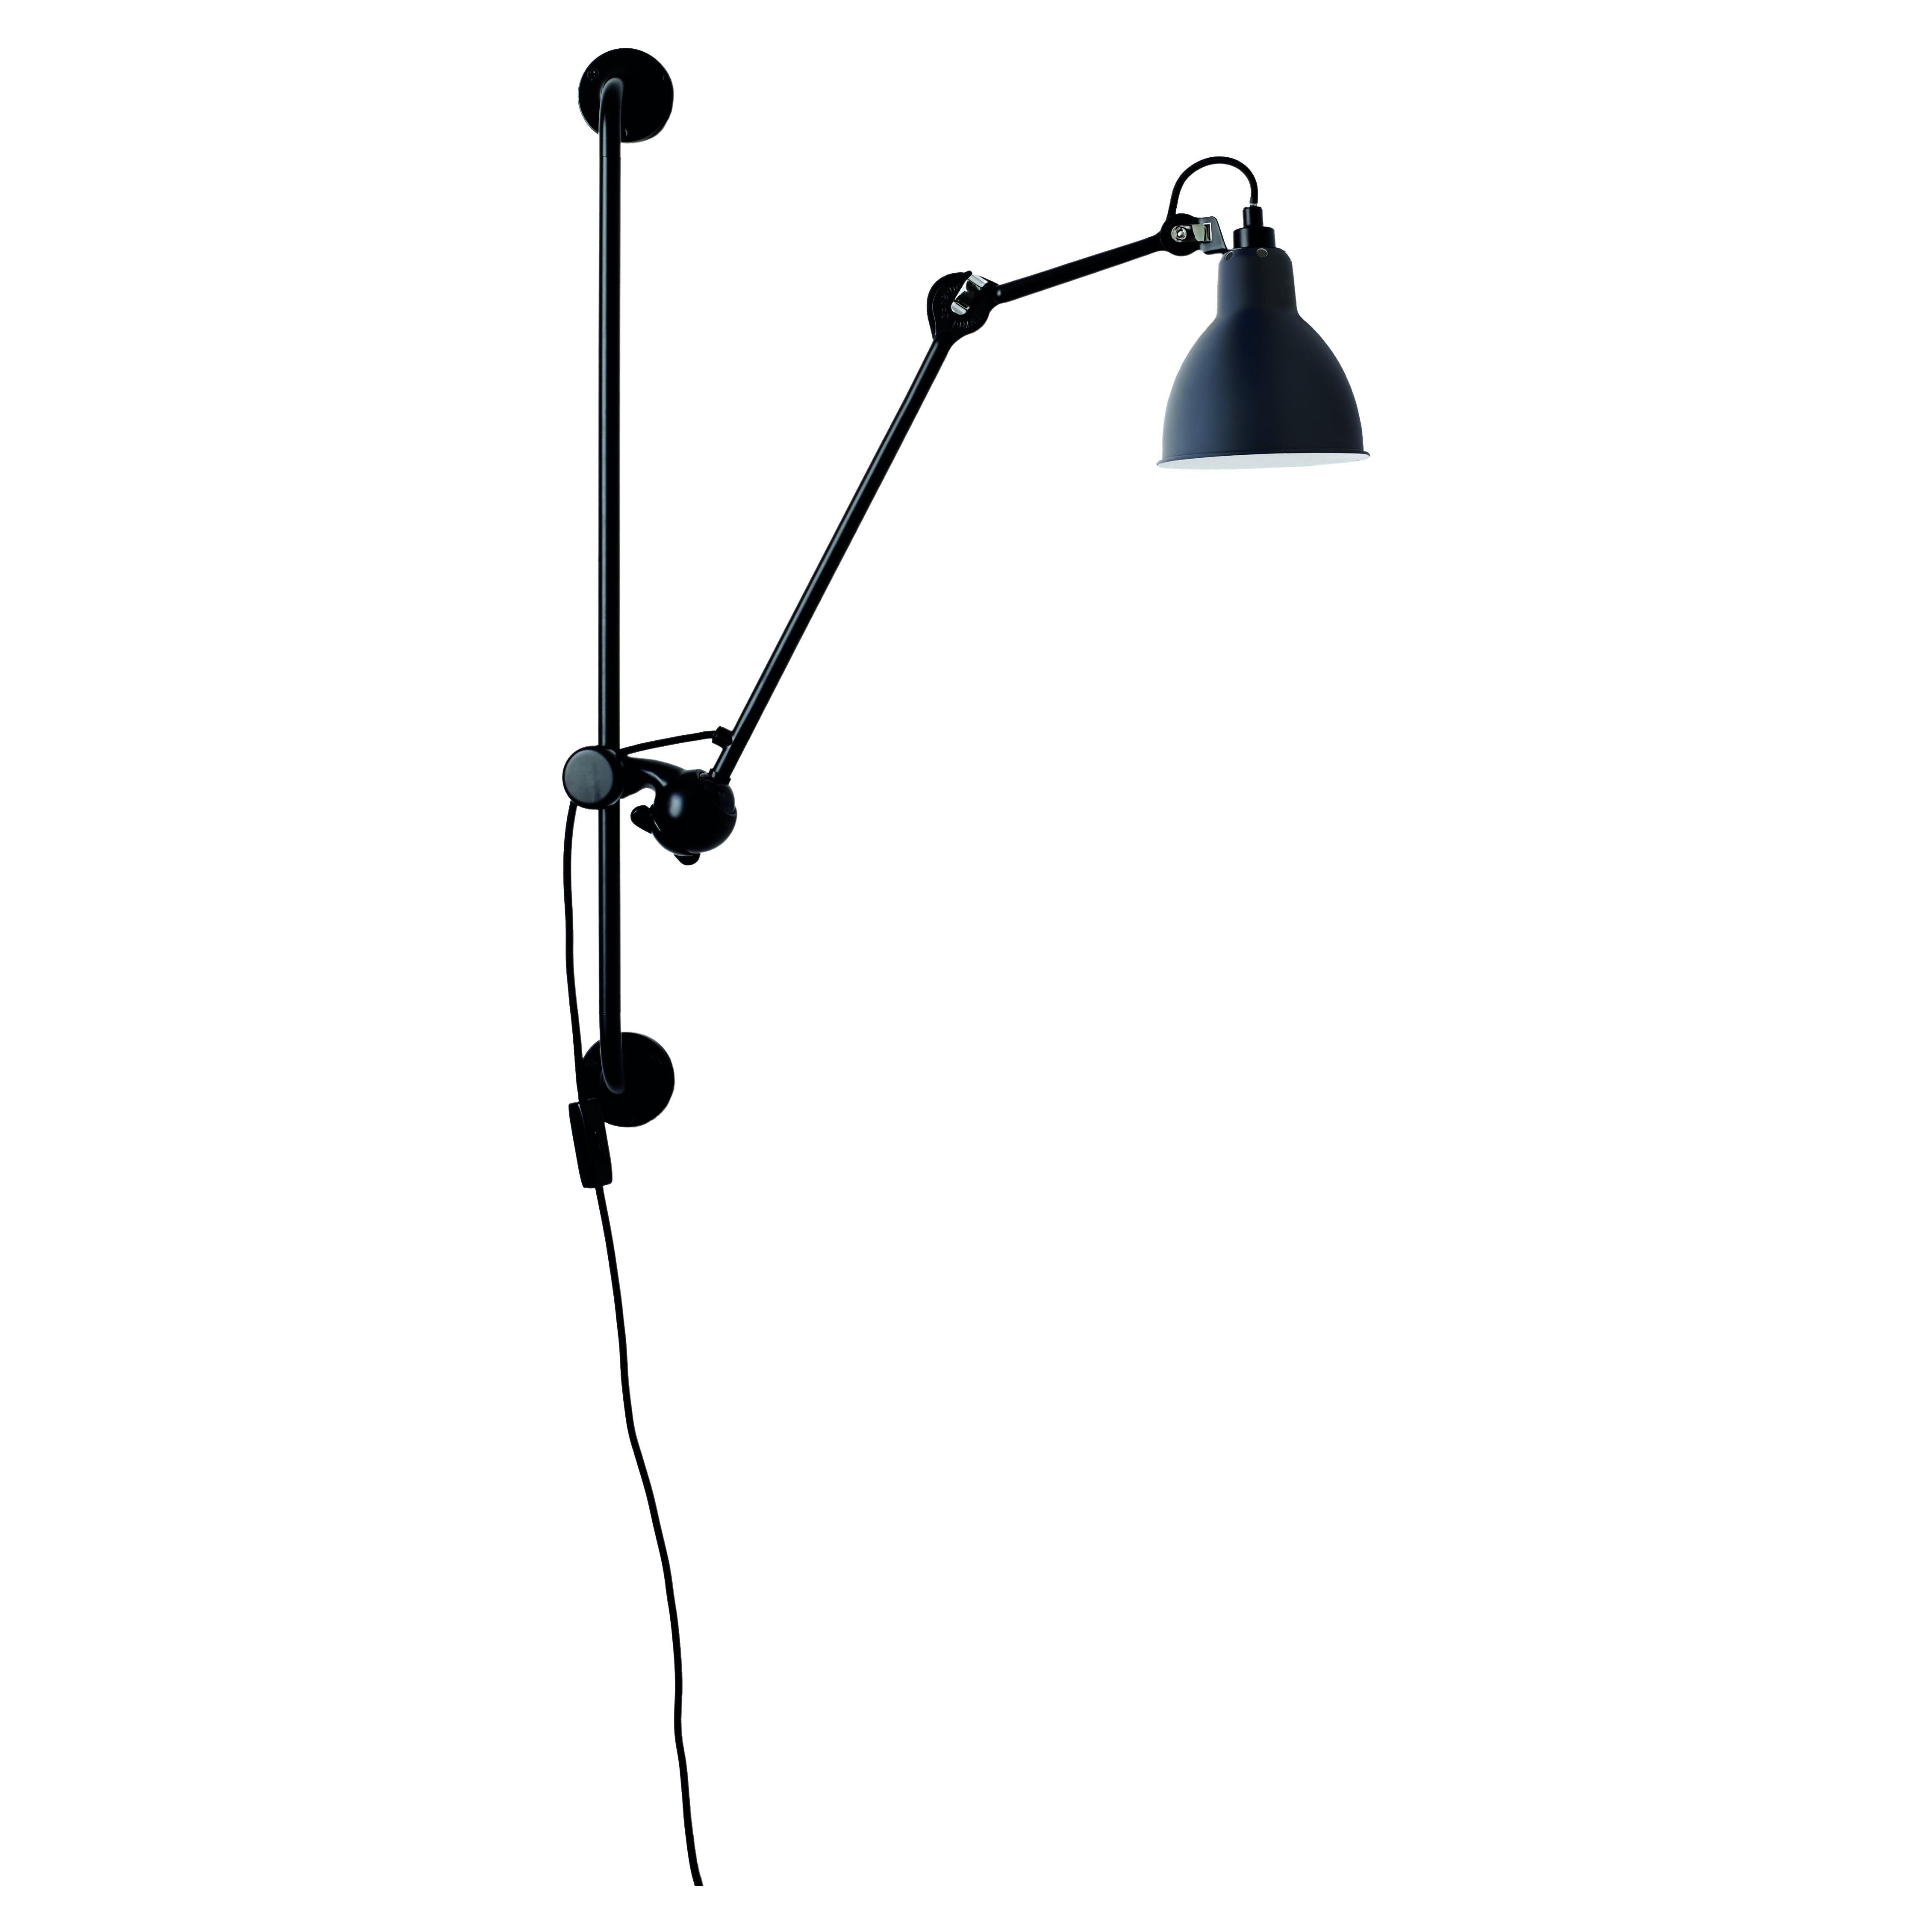 DCW Editions La Lampe Gras N°210 Wall Lamp in Black Arm and Blue Shade